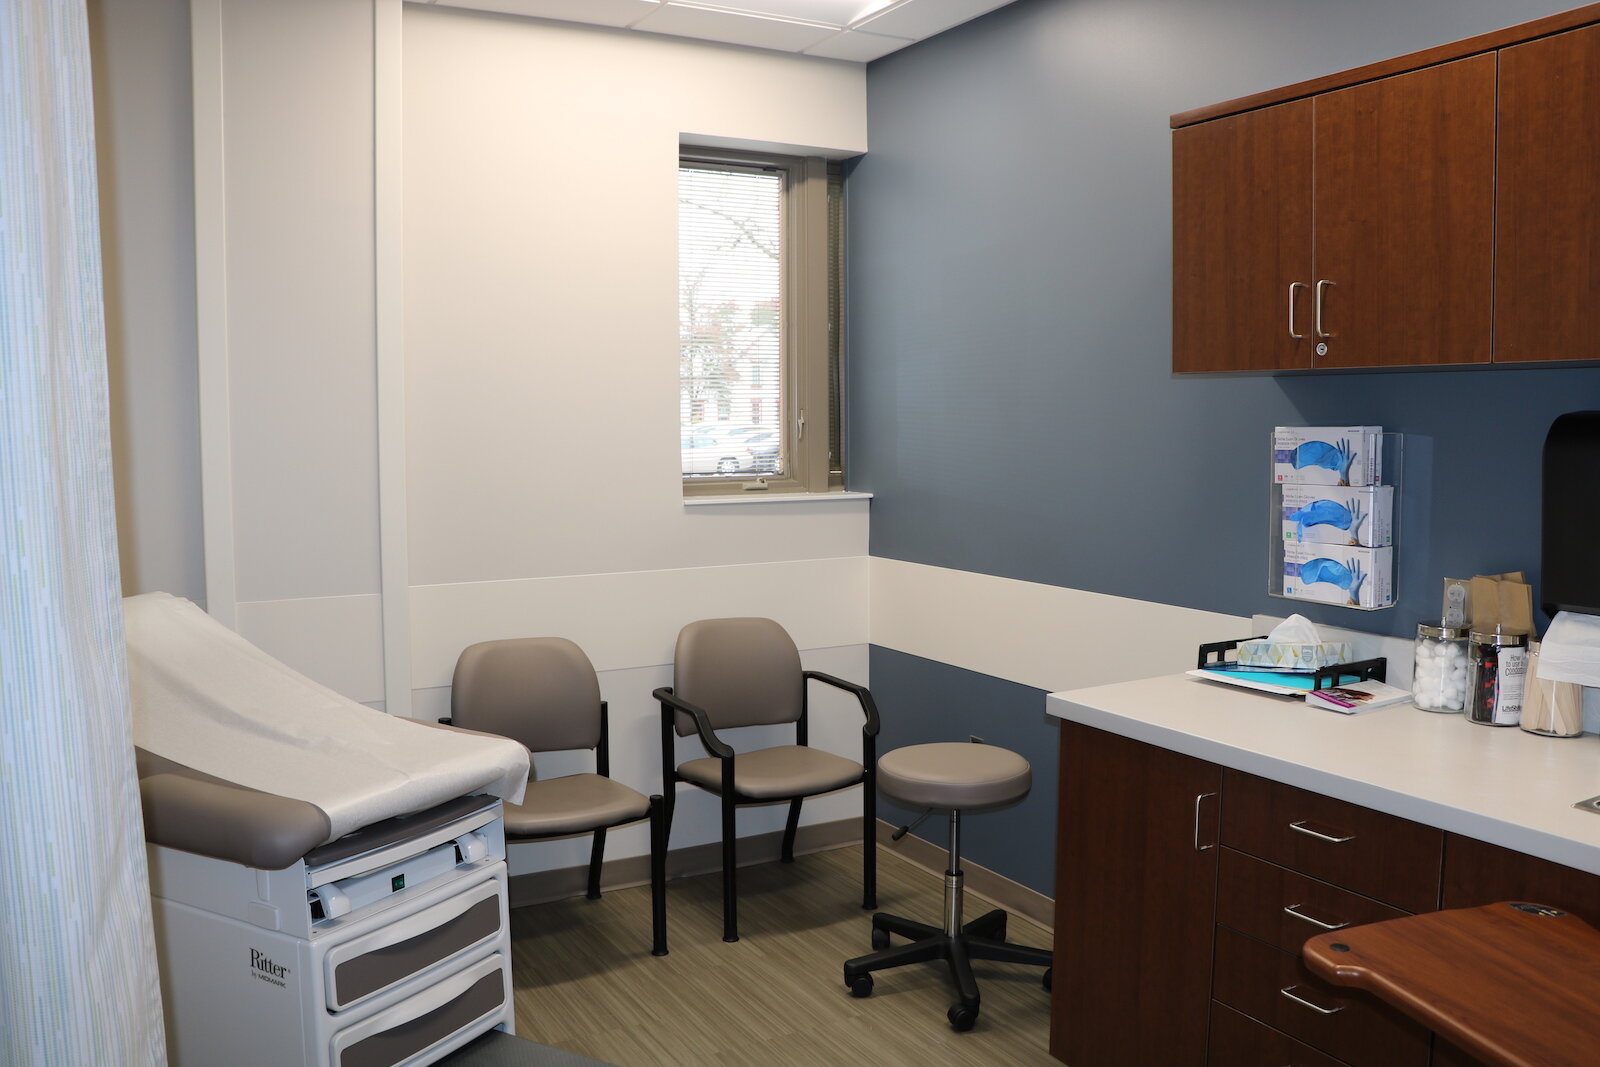 Alliance Health Centers offers primary care, behavioral care, and OB-GYN services.